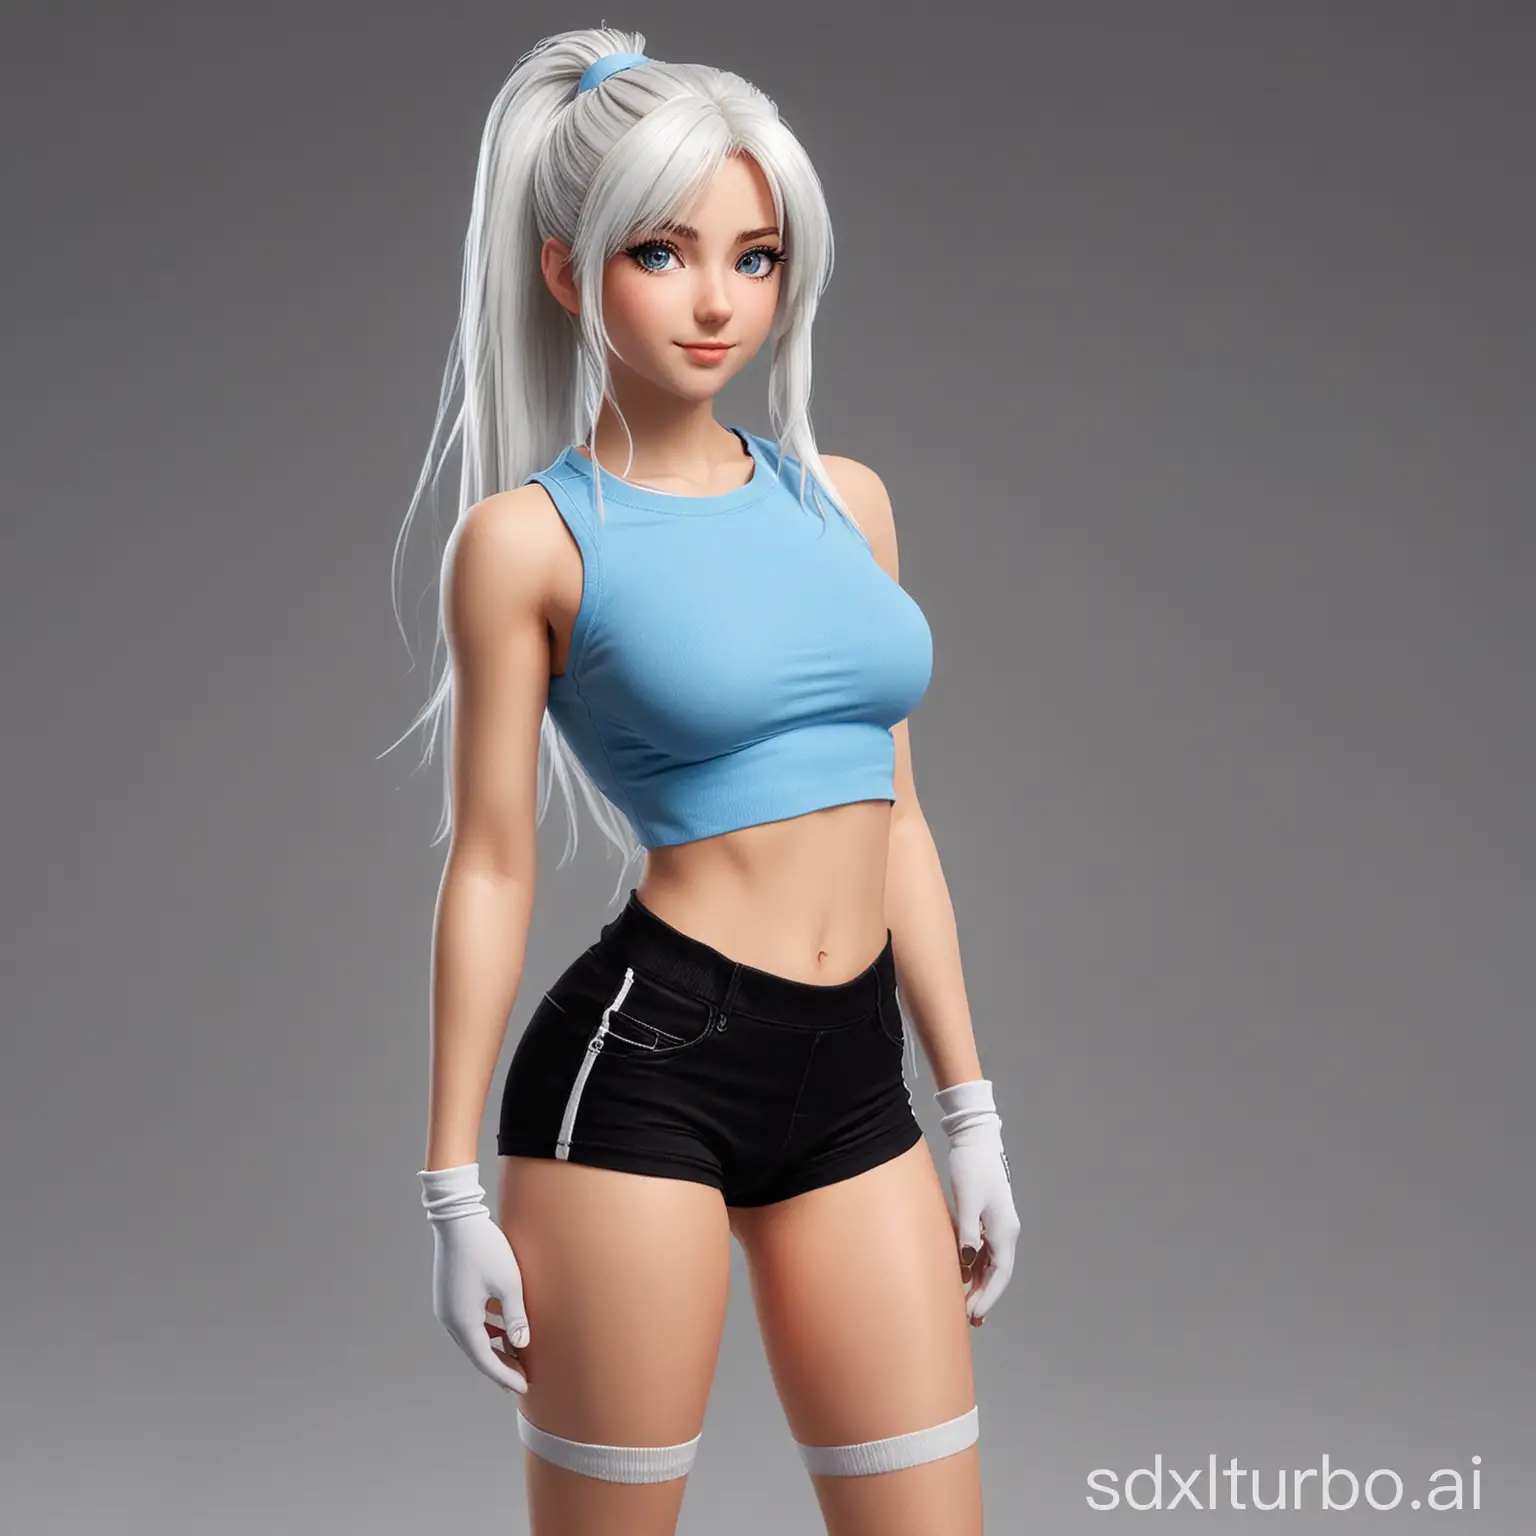 Create ananime girl. europeoid facial features fit body. attractive breasts. attractive butt. full height. attractive face. happy face. long white hair. hair with fringe. ponytail with red rubber band. light blue eyes. thin eyebrows. sexy fitting blue top with black trim. cropped top. fitting sexy tight sporty black shorts. shorts with light blue fabric inserts. white sneakers. white socks.